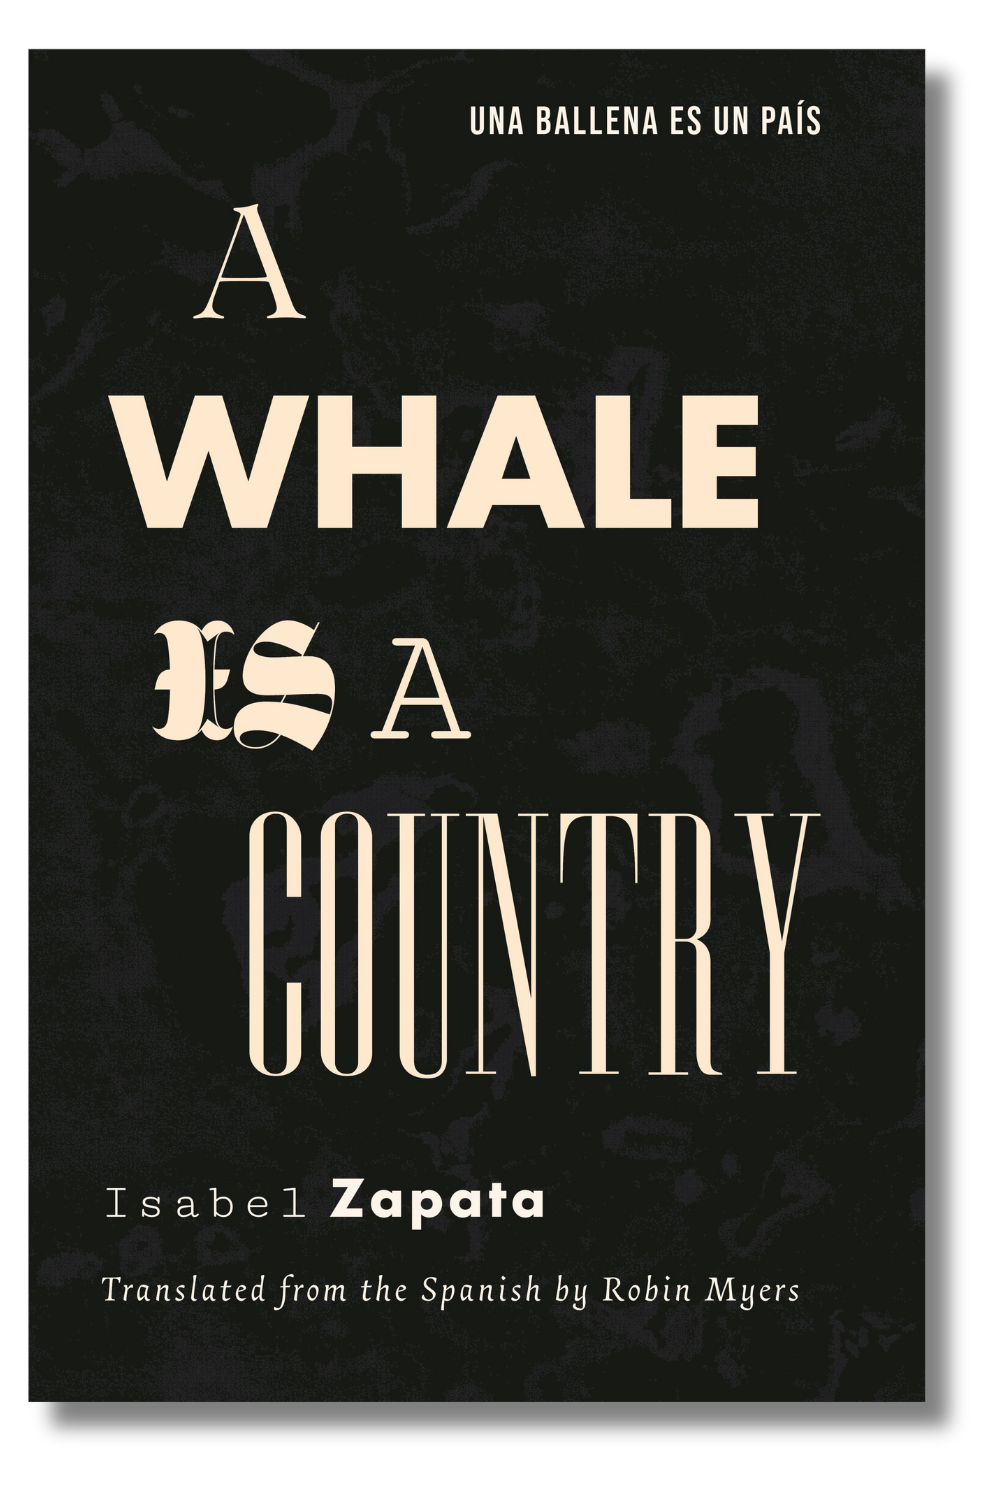 The cover of "A Whale Is a Country" by Isabel Zapata, tr. by Robin Myers